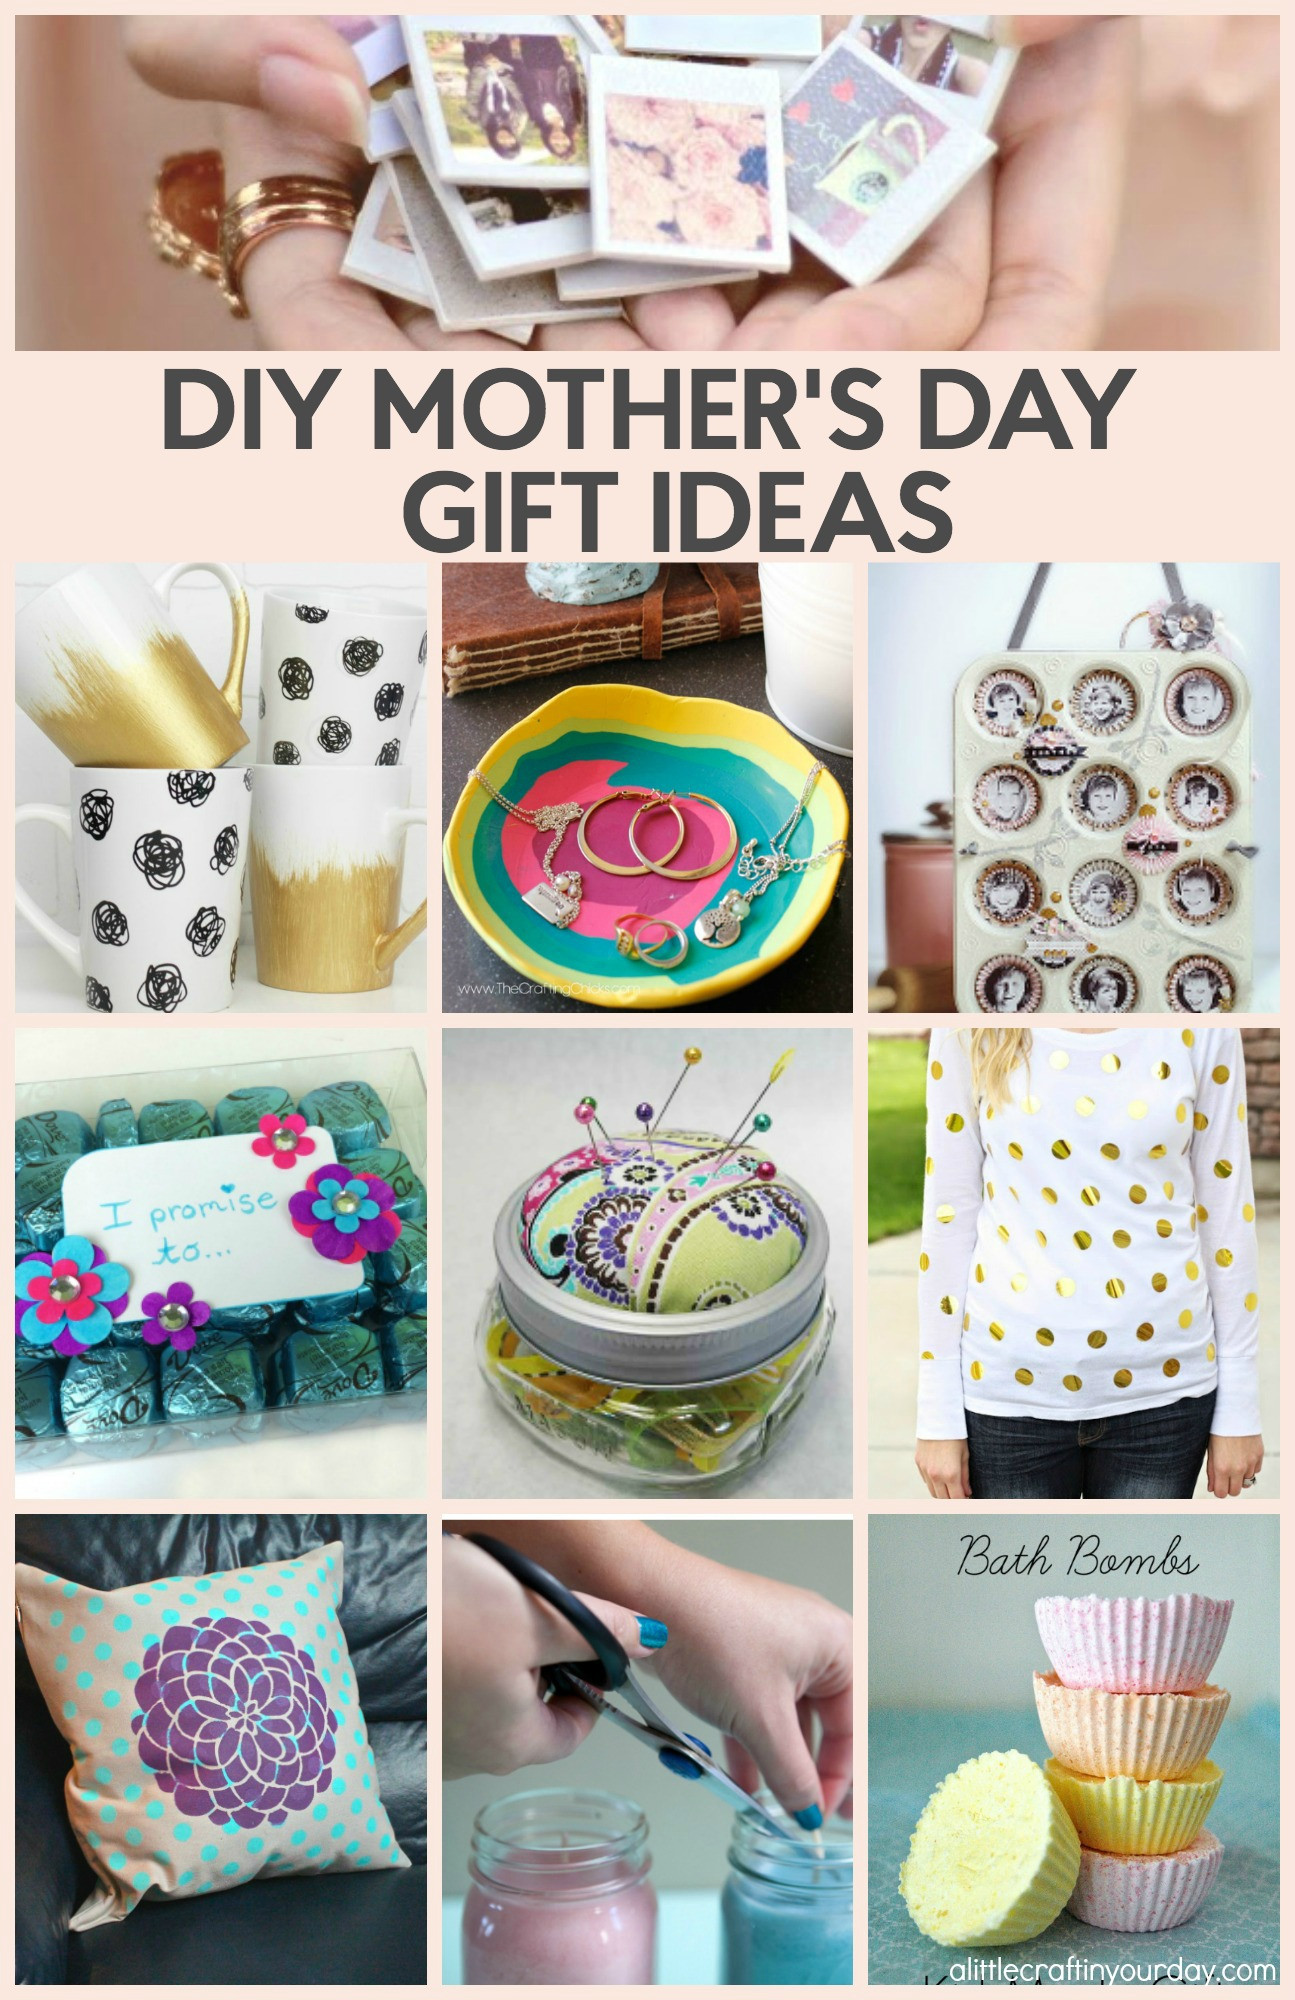 Cute Mother Day Gift Ideas
 15 Cute Mother’s Day Gift Ideas She’ll Love A Little